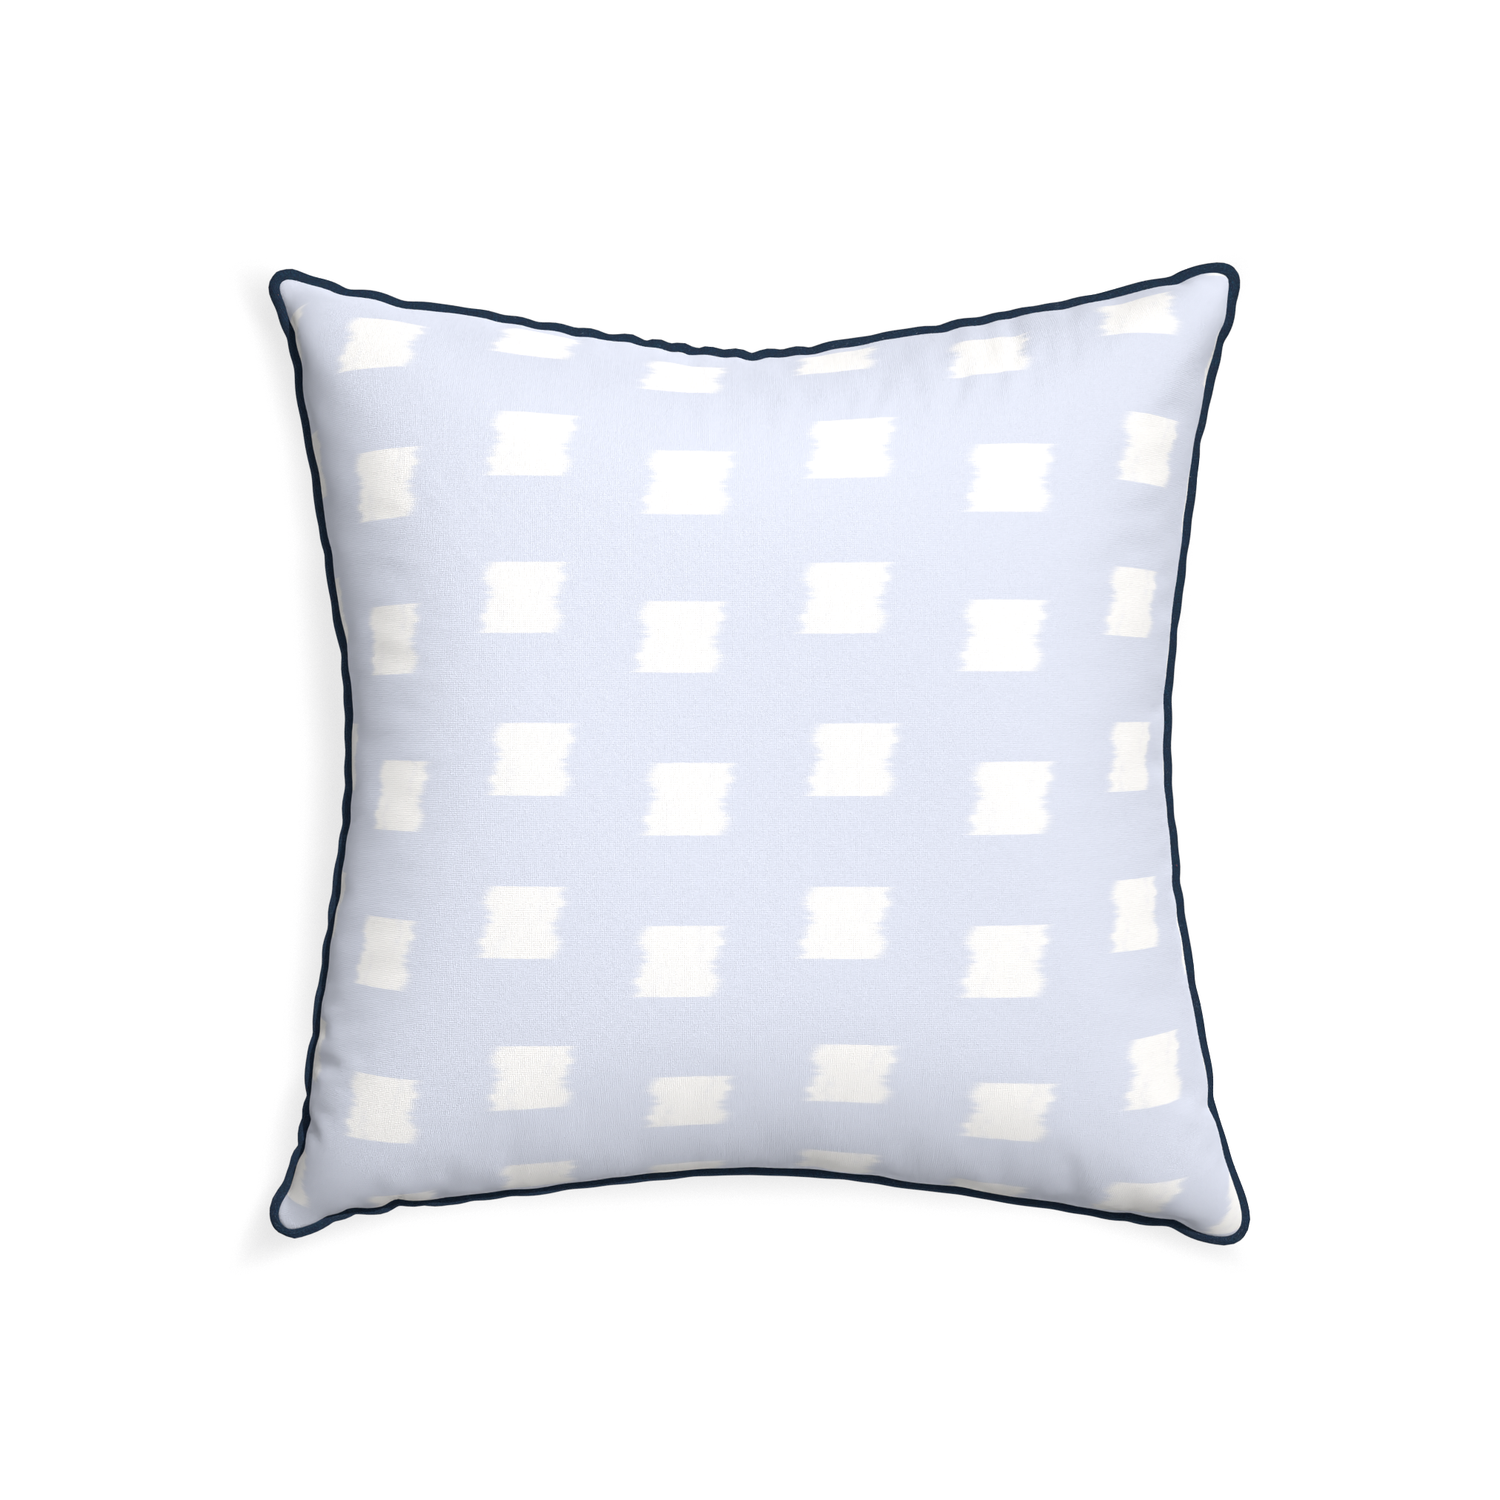 22-square denton custom sky blue patternpillow with c piping on white background